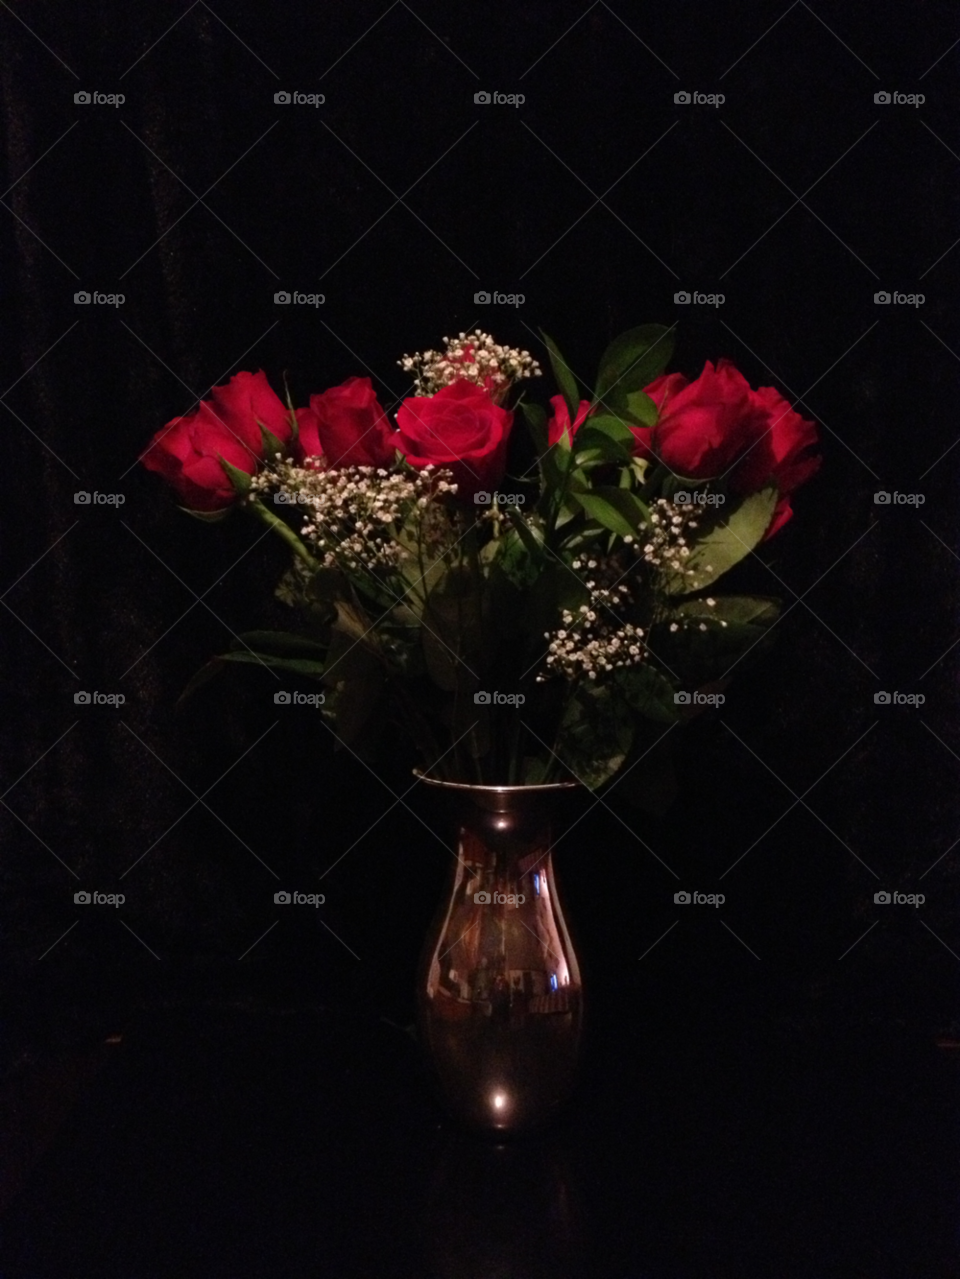 a dozen roses from my daughter just because i am loved by K3lliree